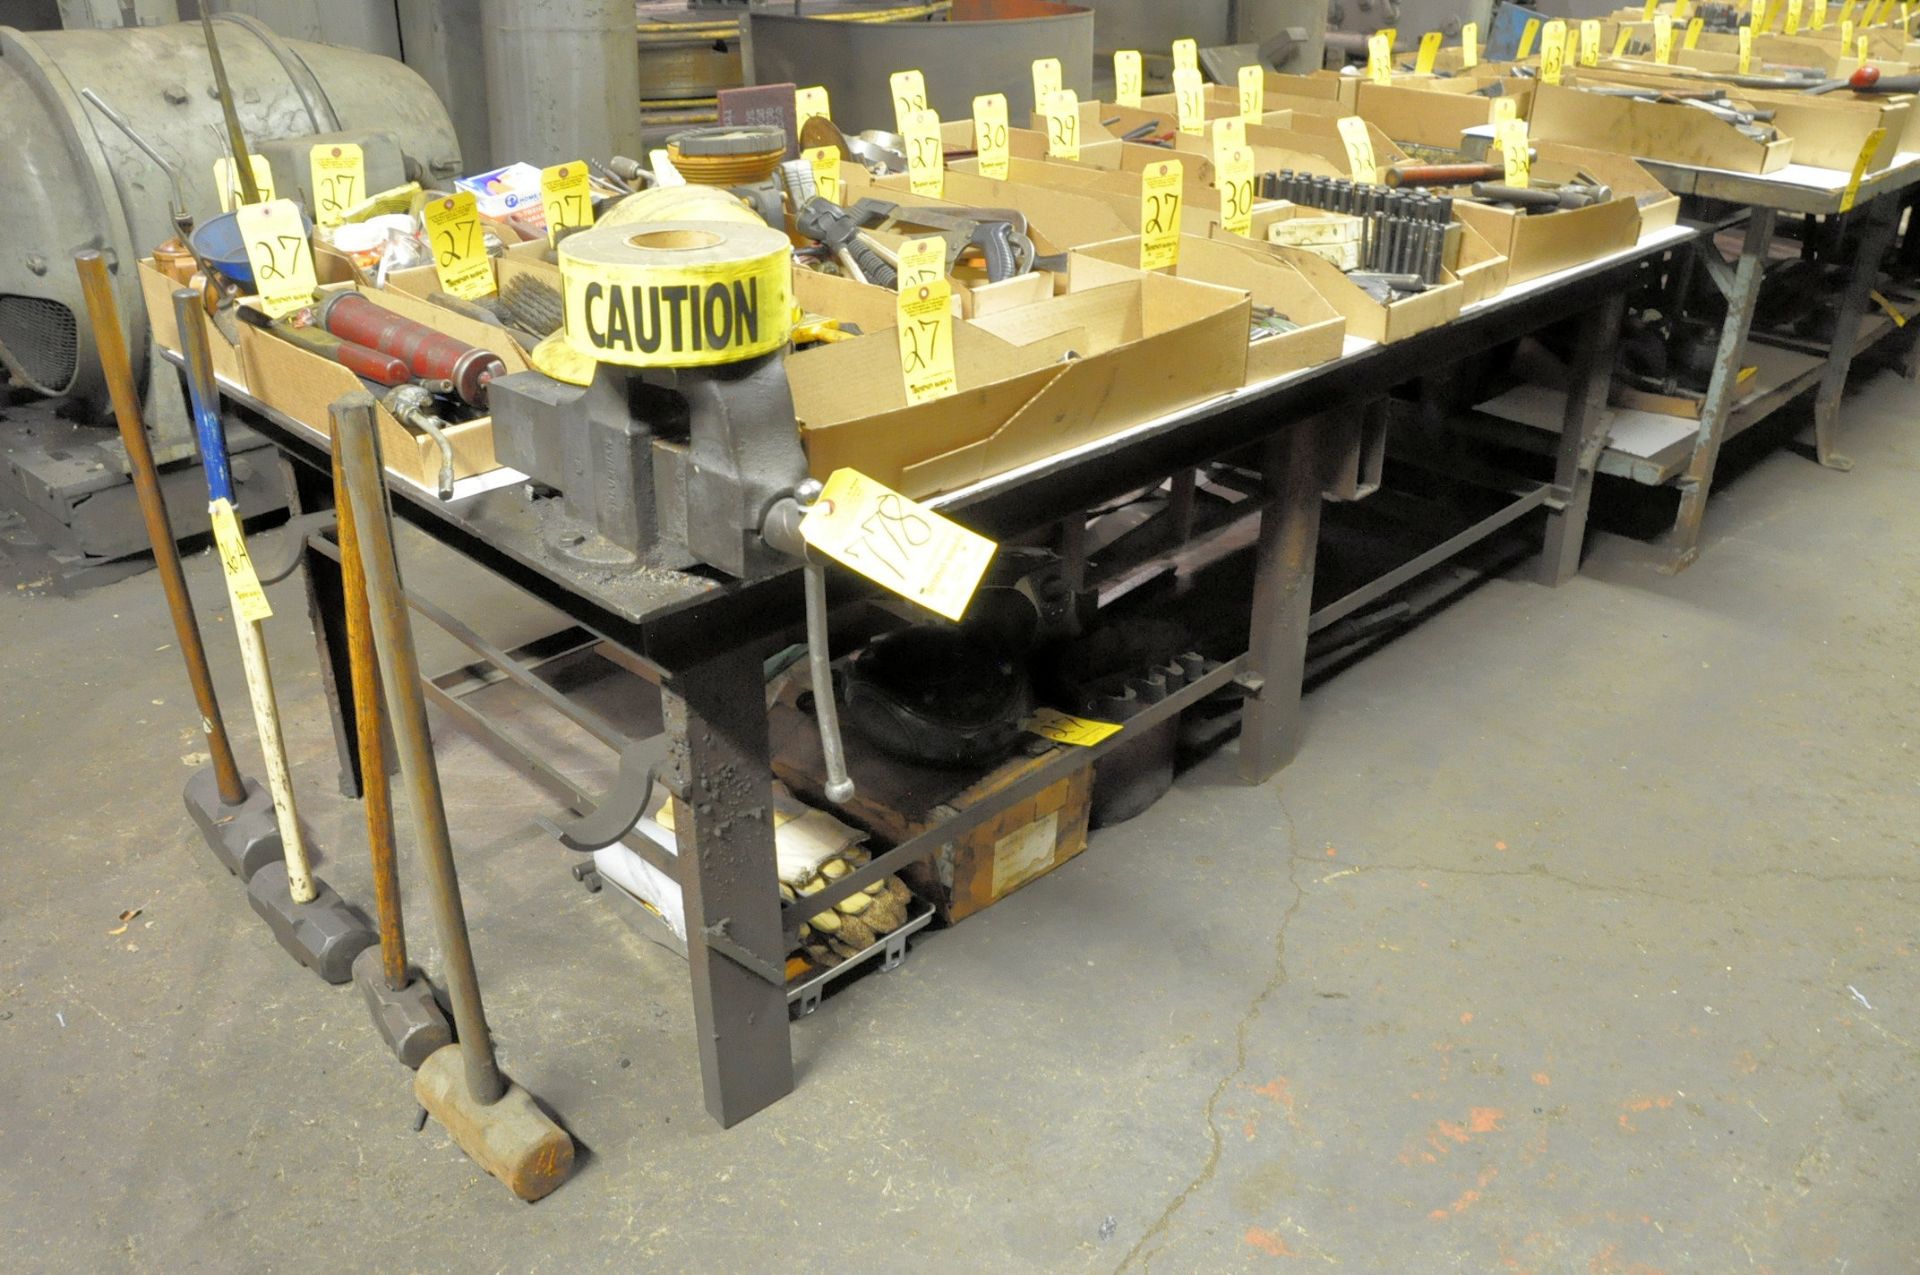 96"L X 48"W X 29"H Heavy Duty Steel Table with 4-1/2" Bench Vise (Contents Not Included) (Not To